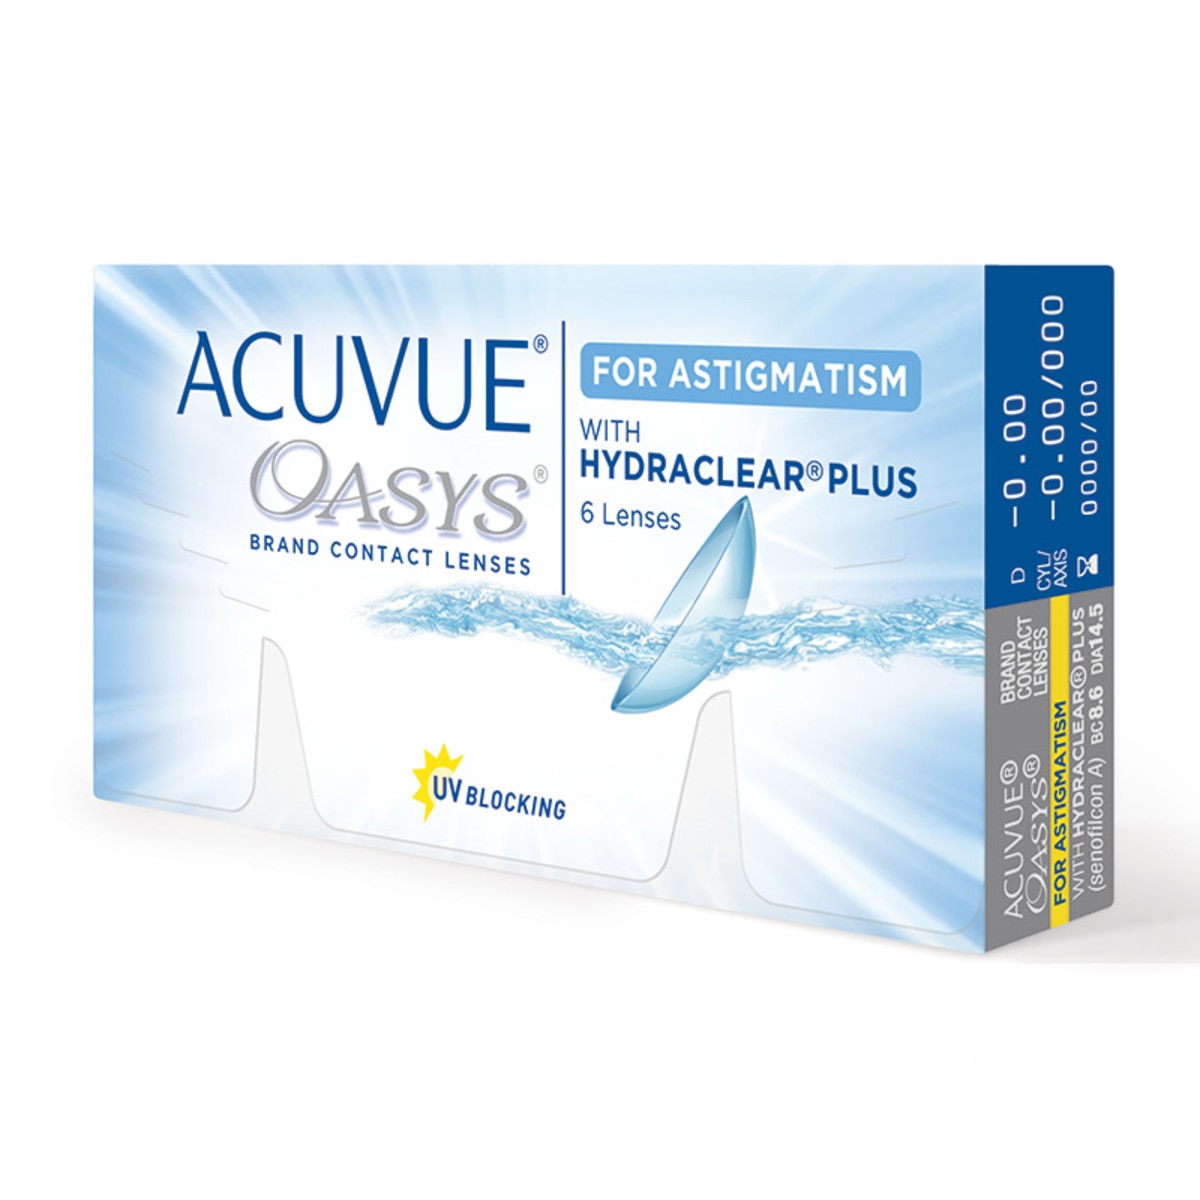 ACUVUE OASYS® con HYDRACLEAR Plus® para Astigmatismo (D -8, Cyl/Axis -1.75/60)